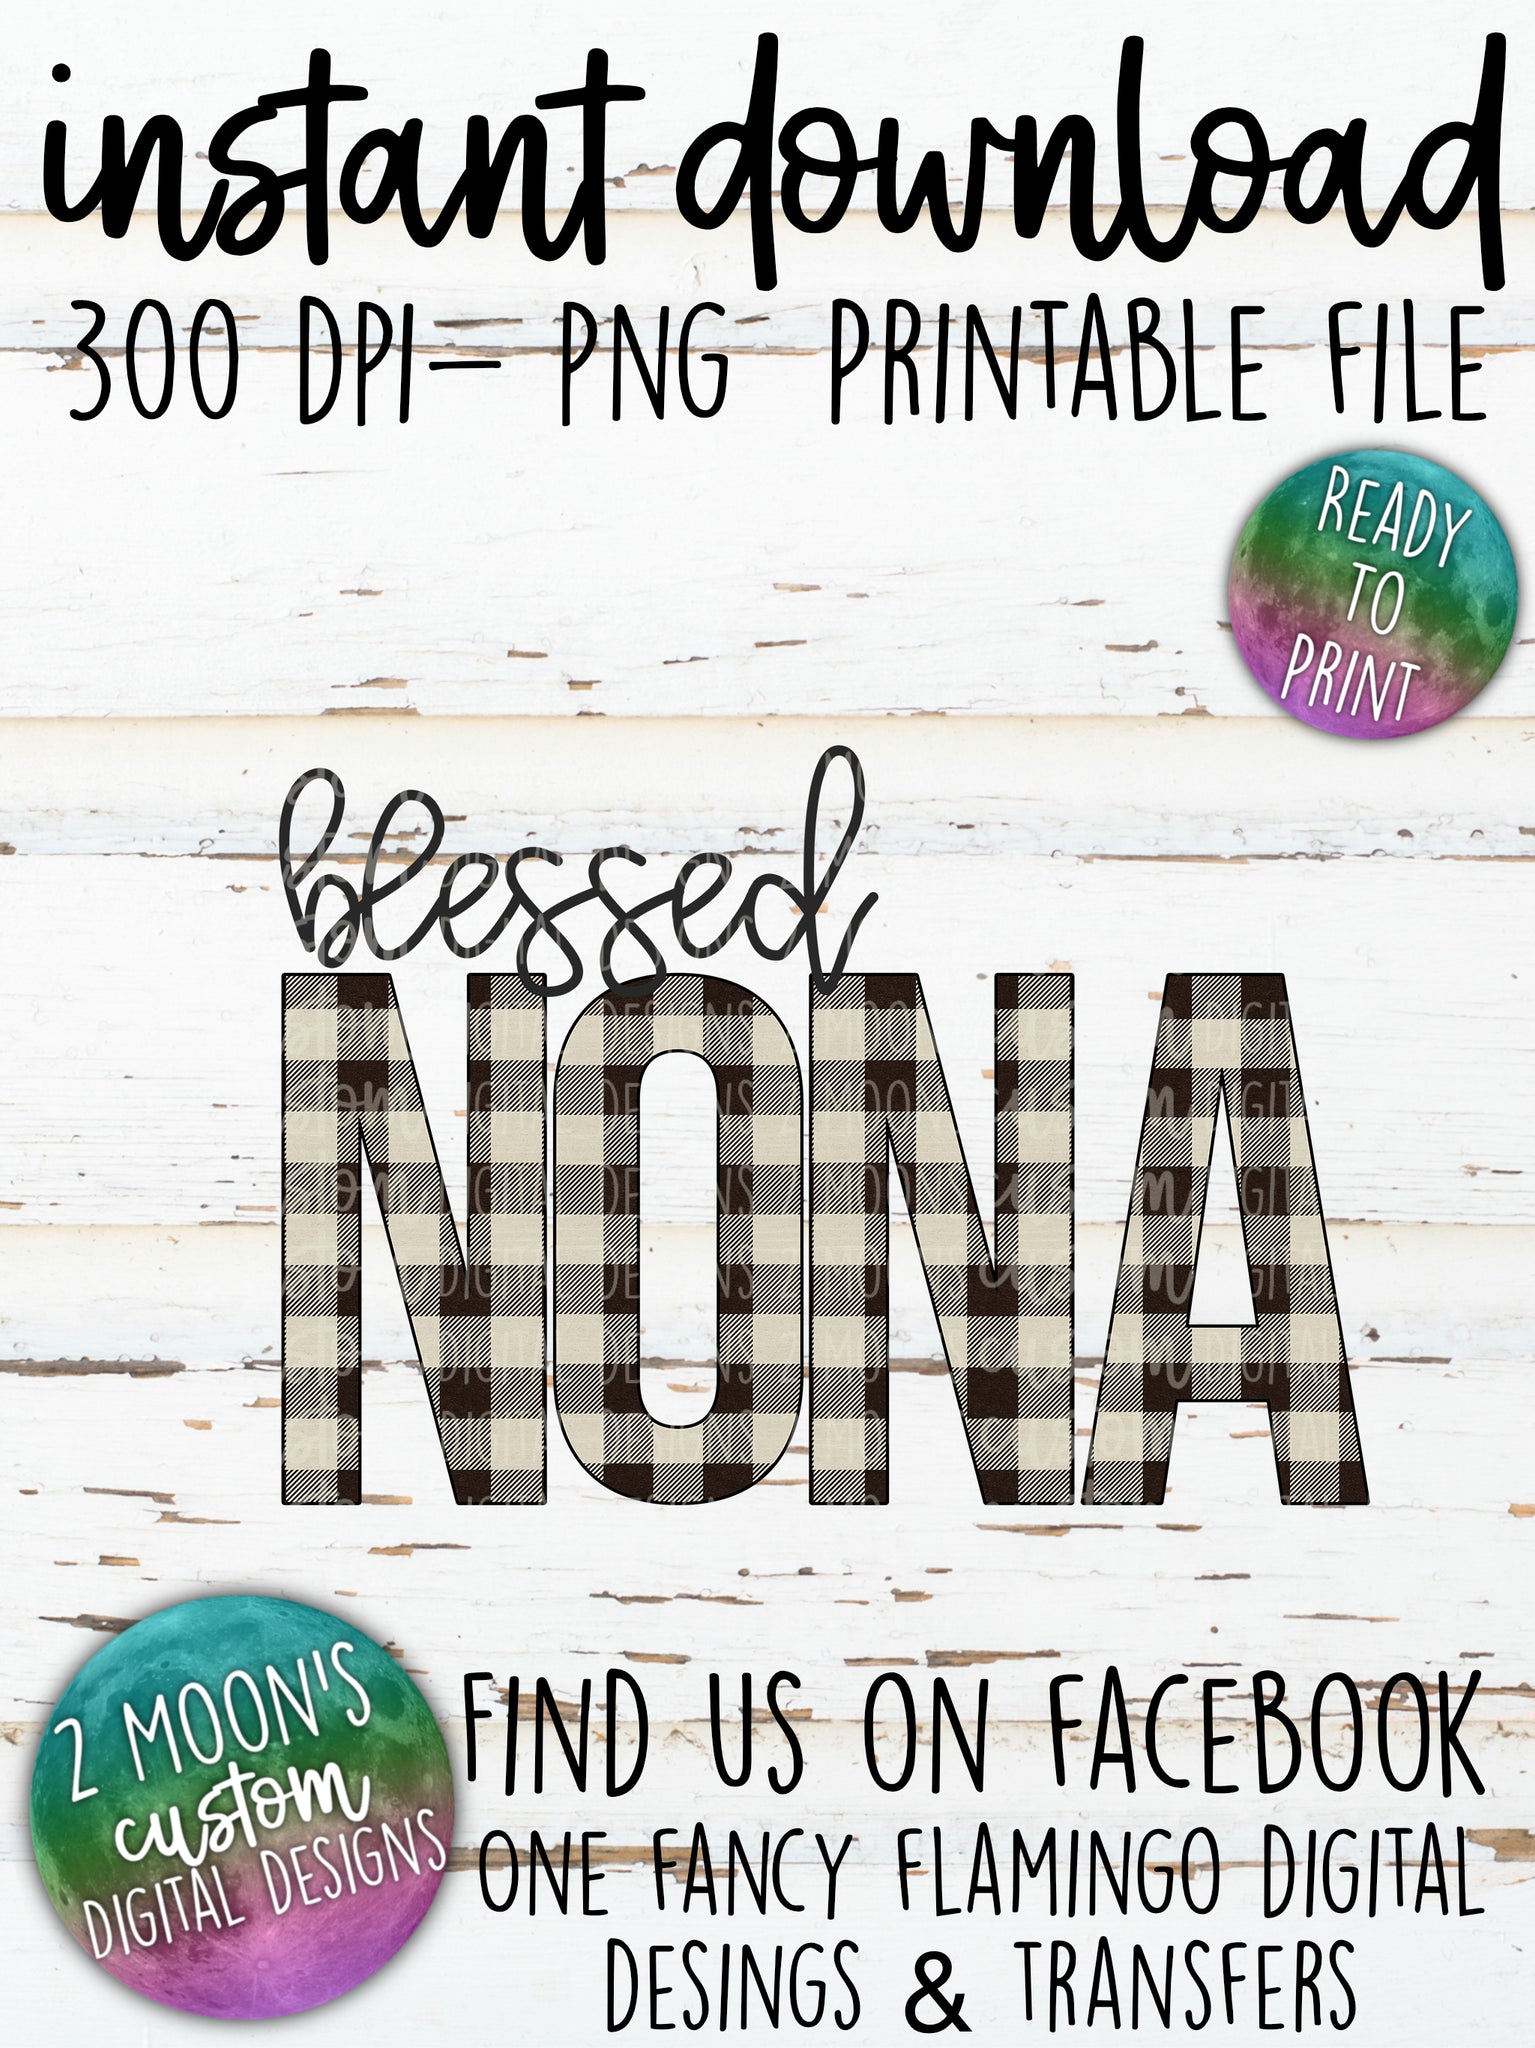 Blessed Nona